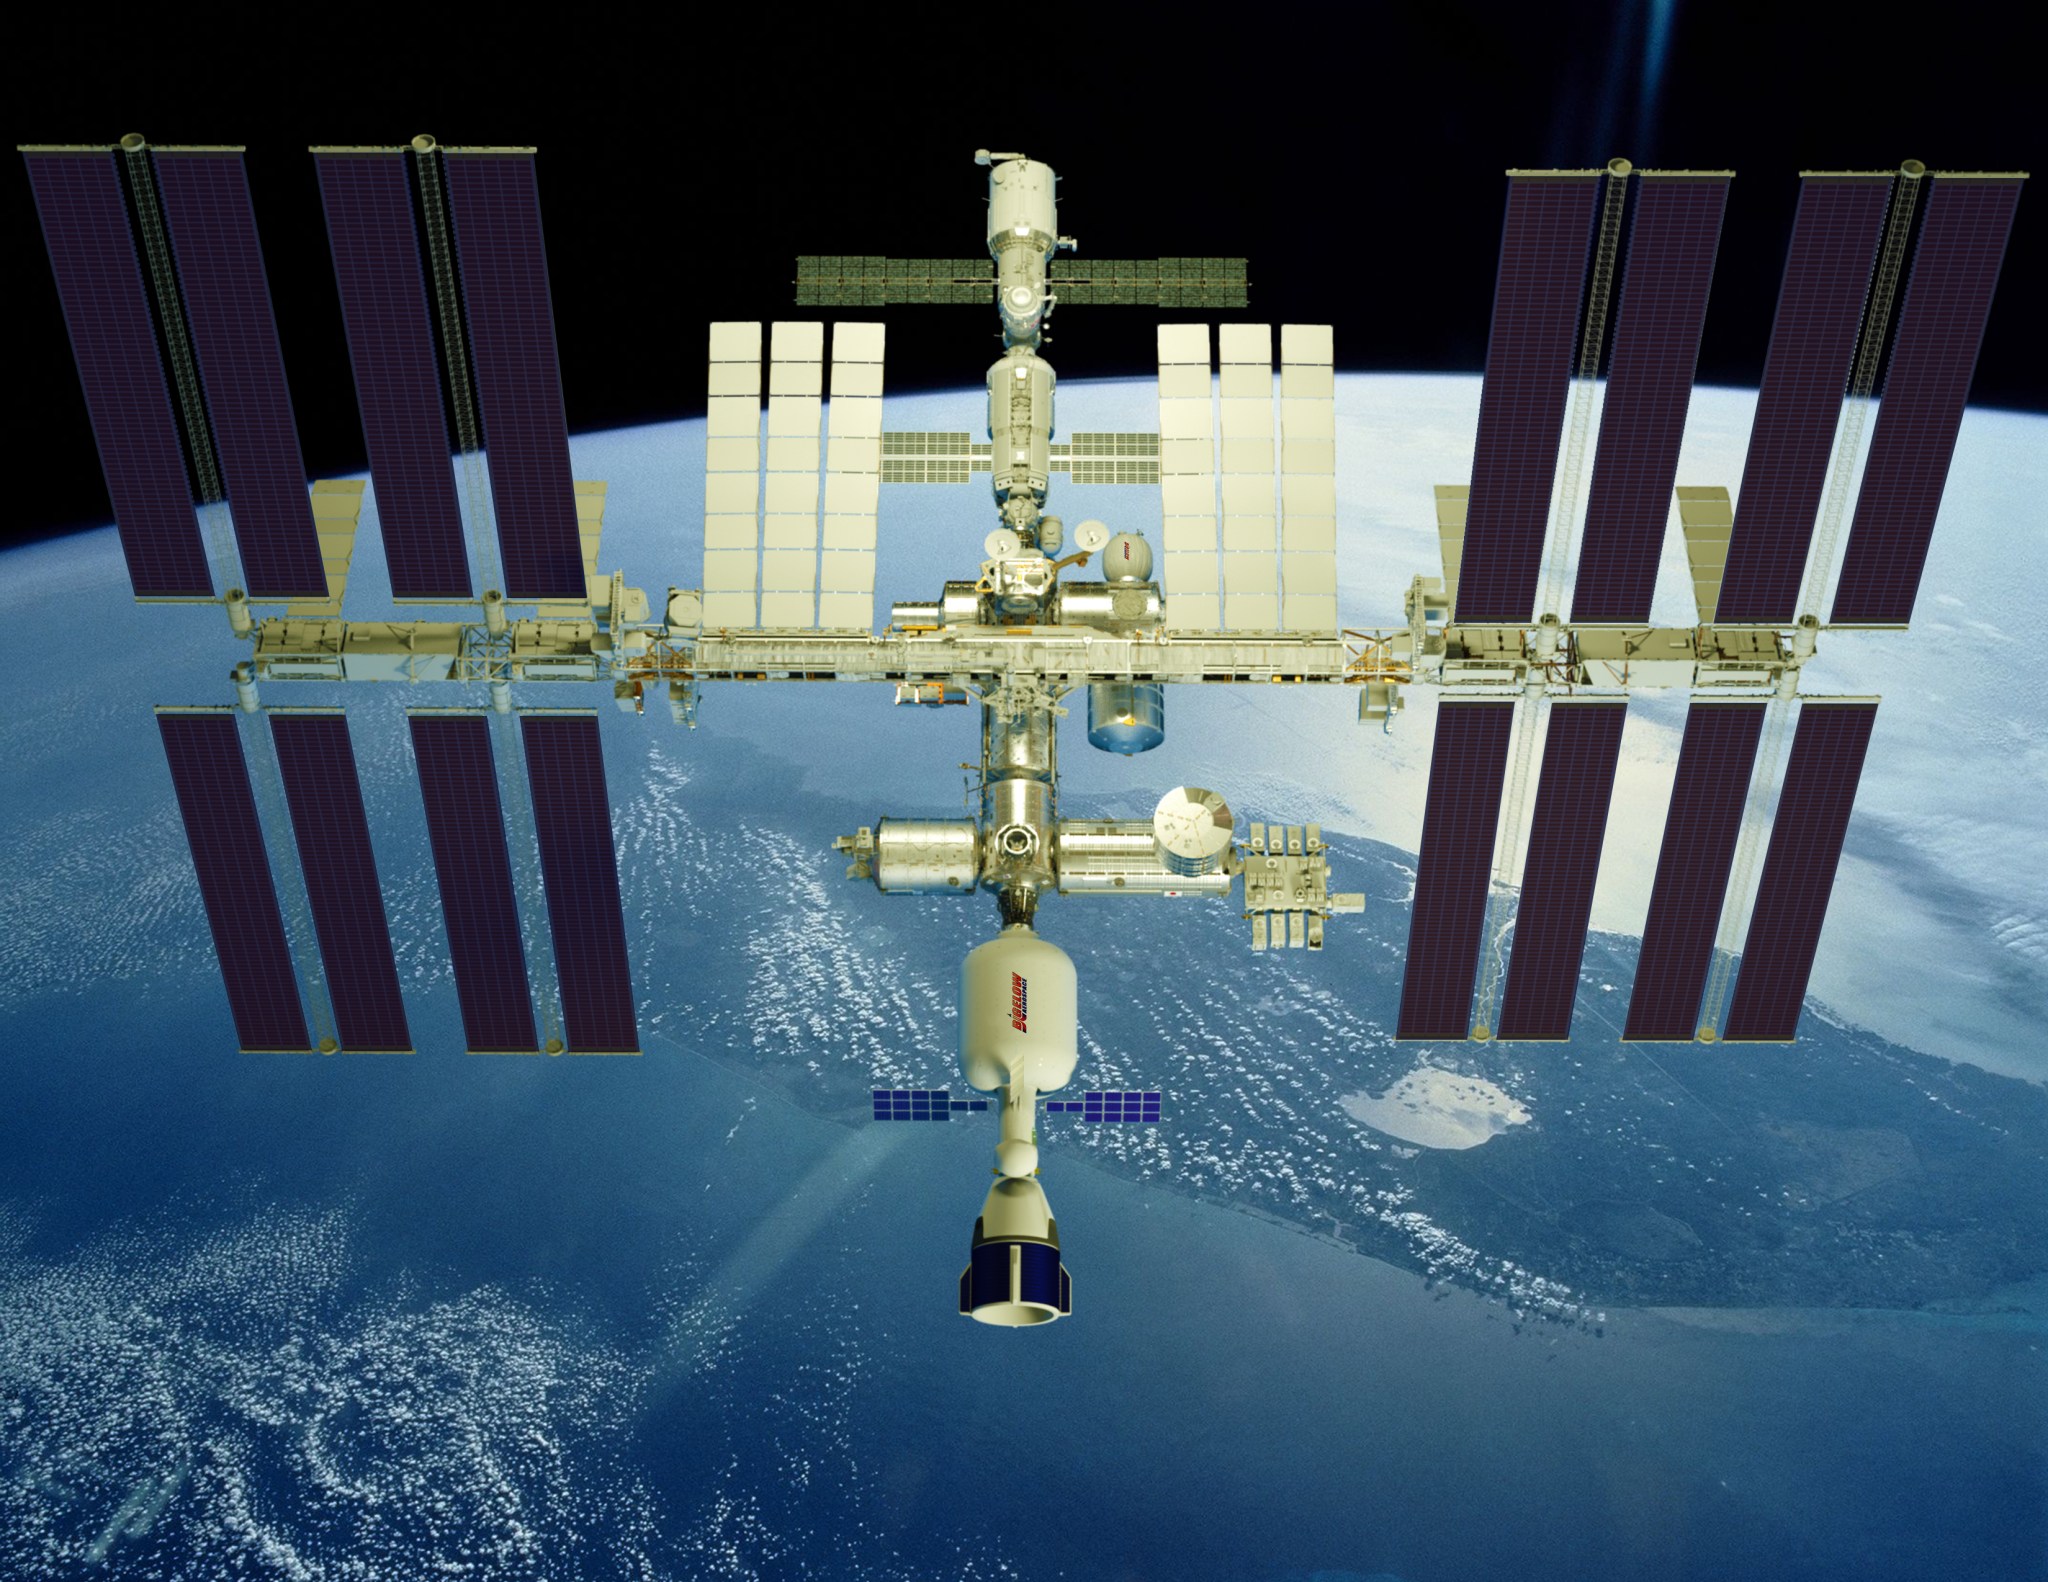 Concept image of Bigelow Aerospace's XBASE docked to the International Space Station.